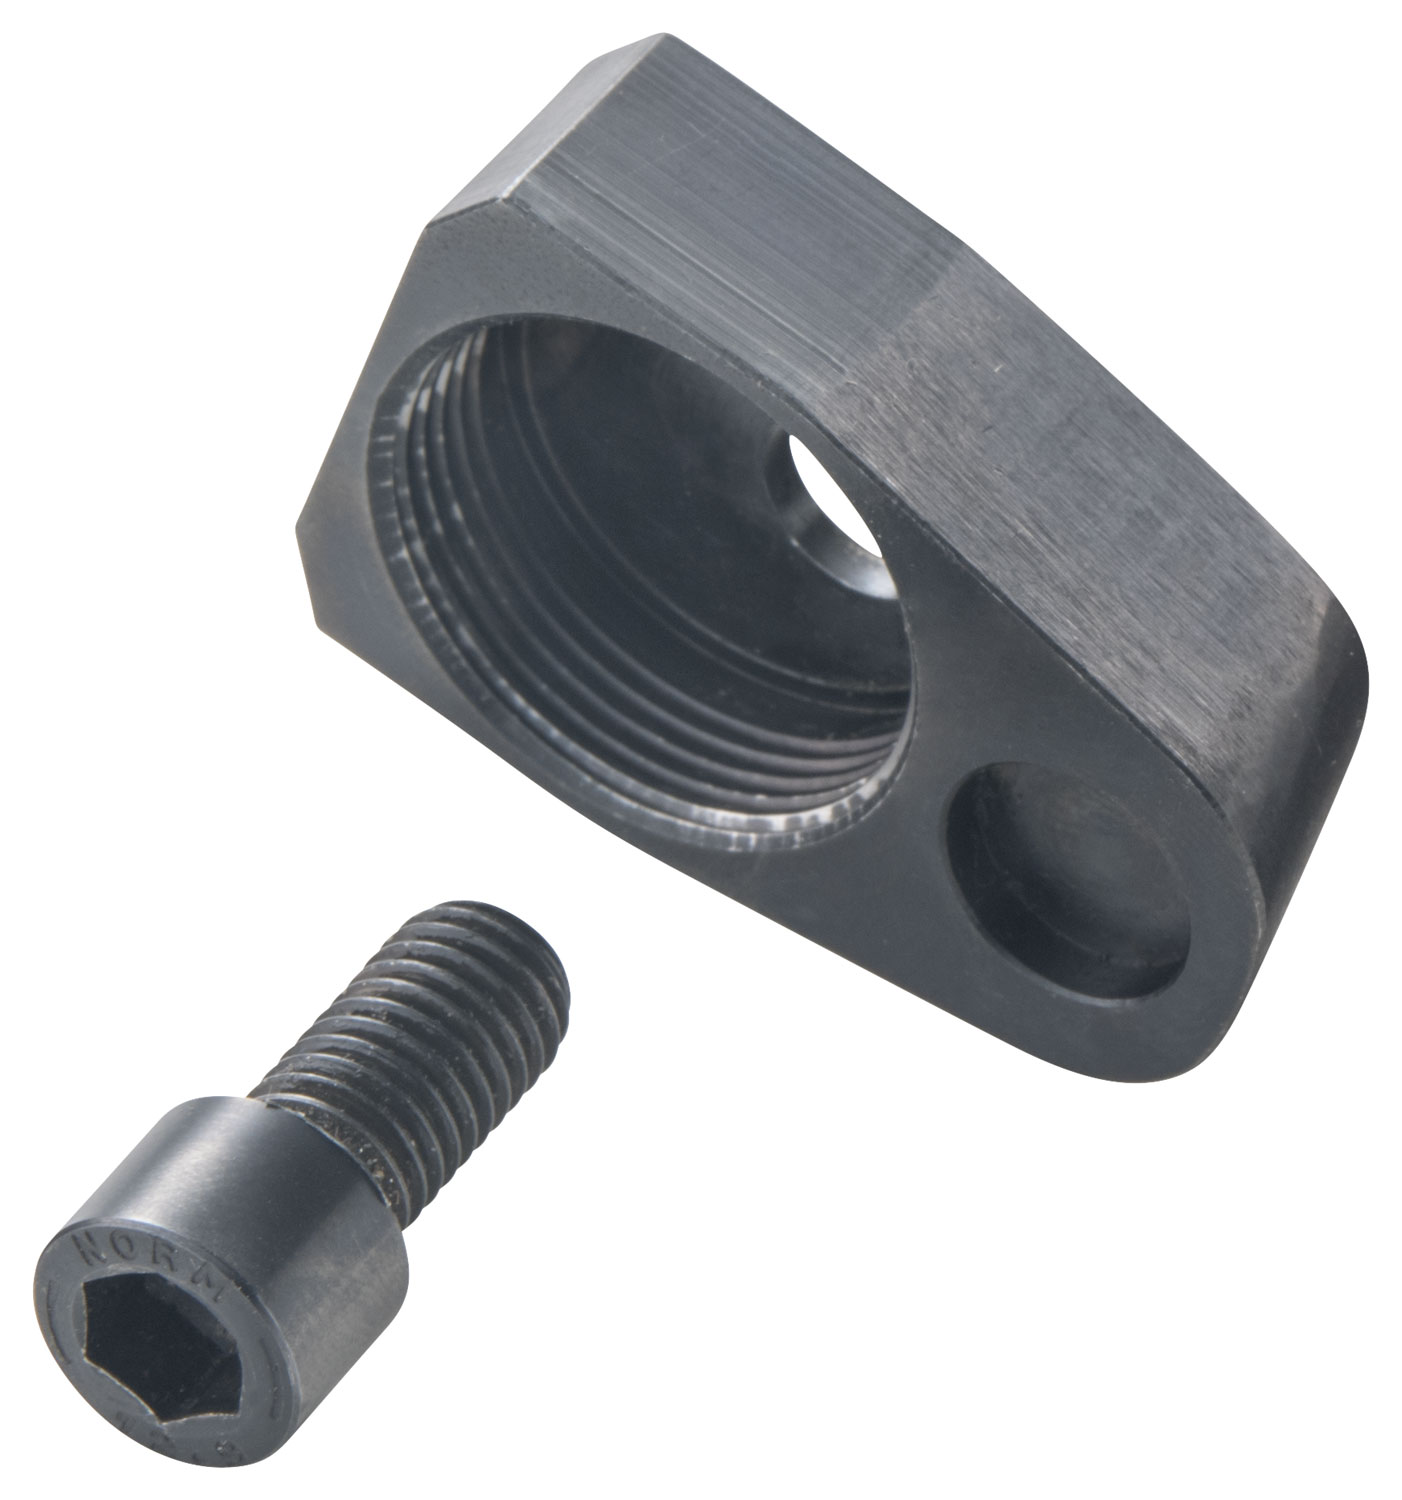 Charles Daly 970483 PAK-9 Adapter Fits Chiappa & Charles Daly Pak-9 Only, Black Finish, Includes Adapter & Screw